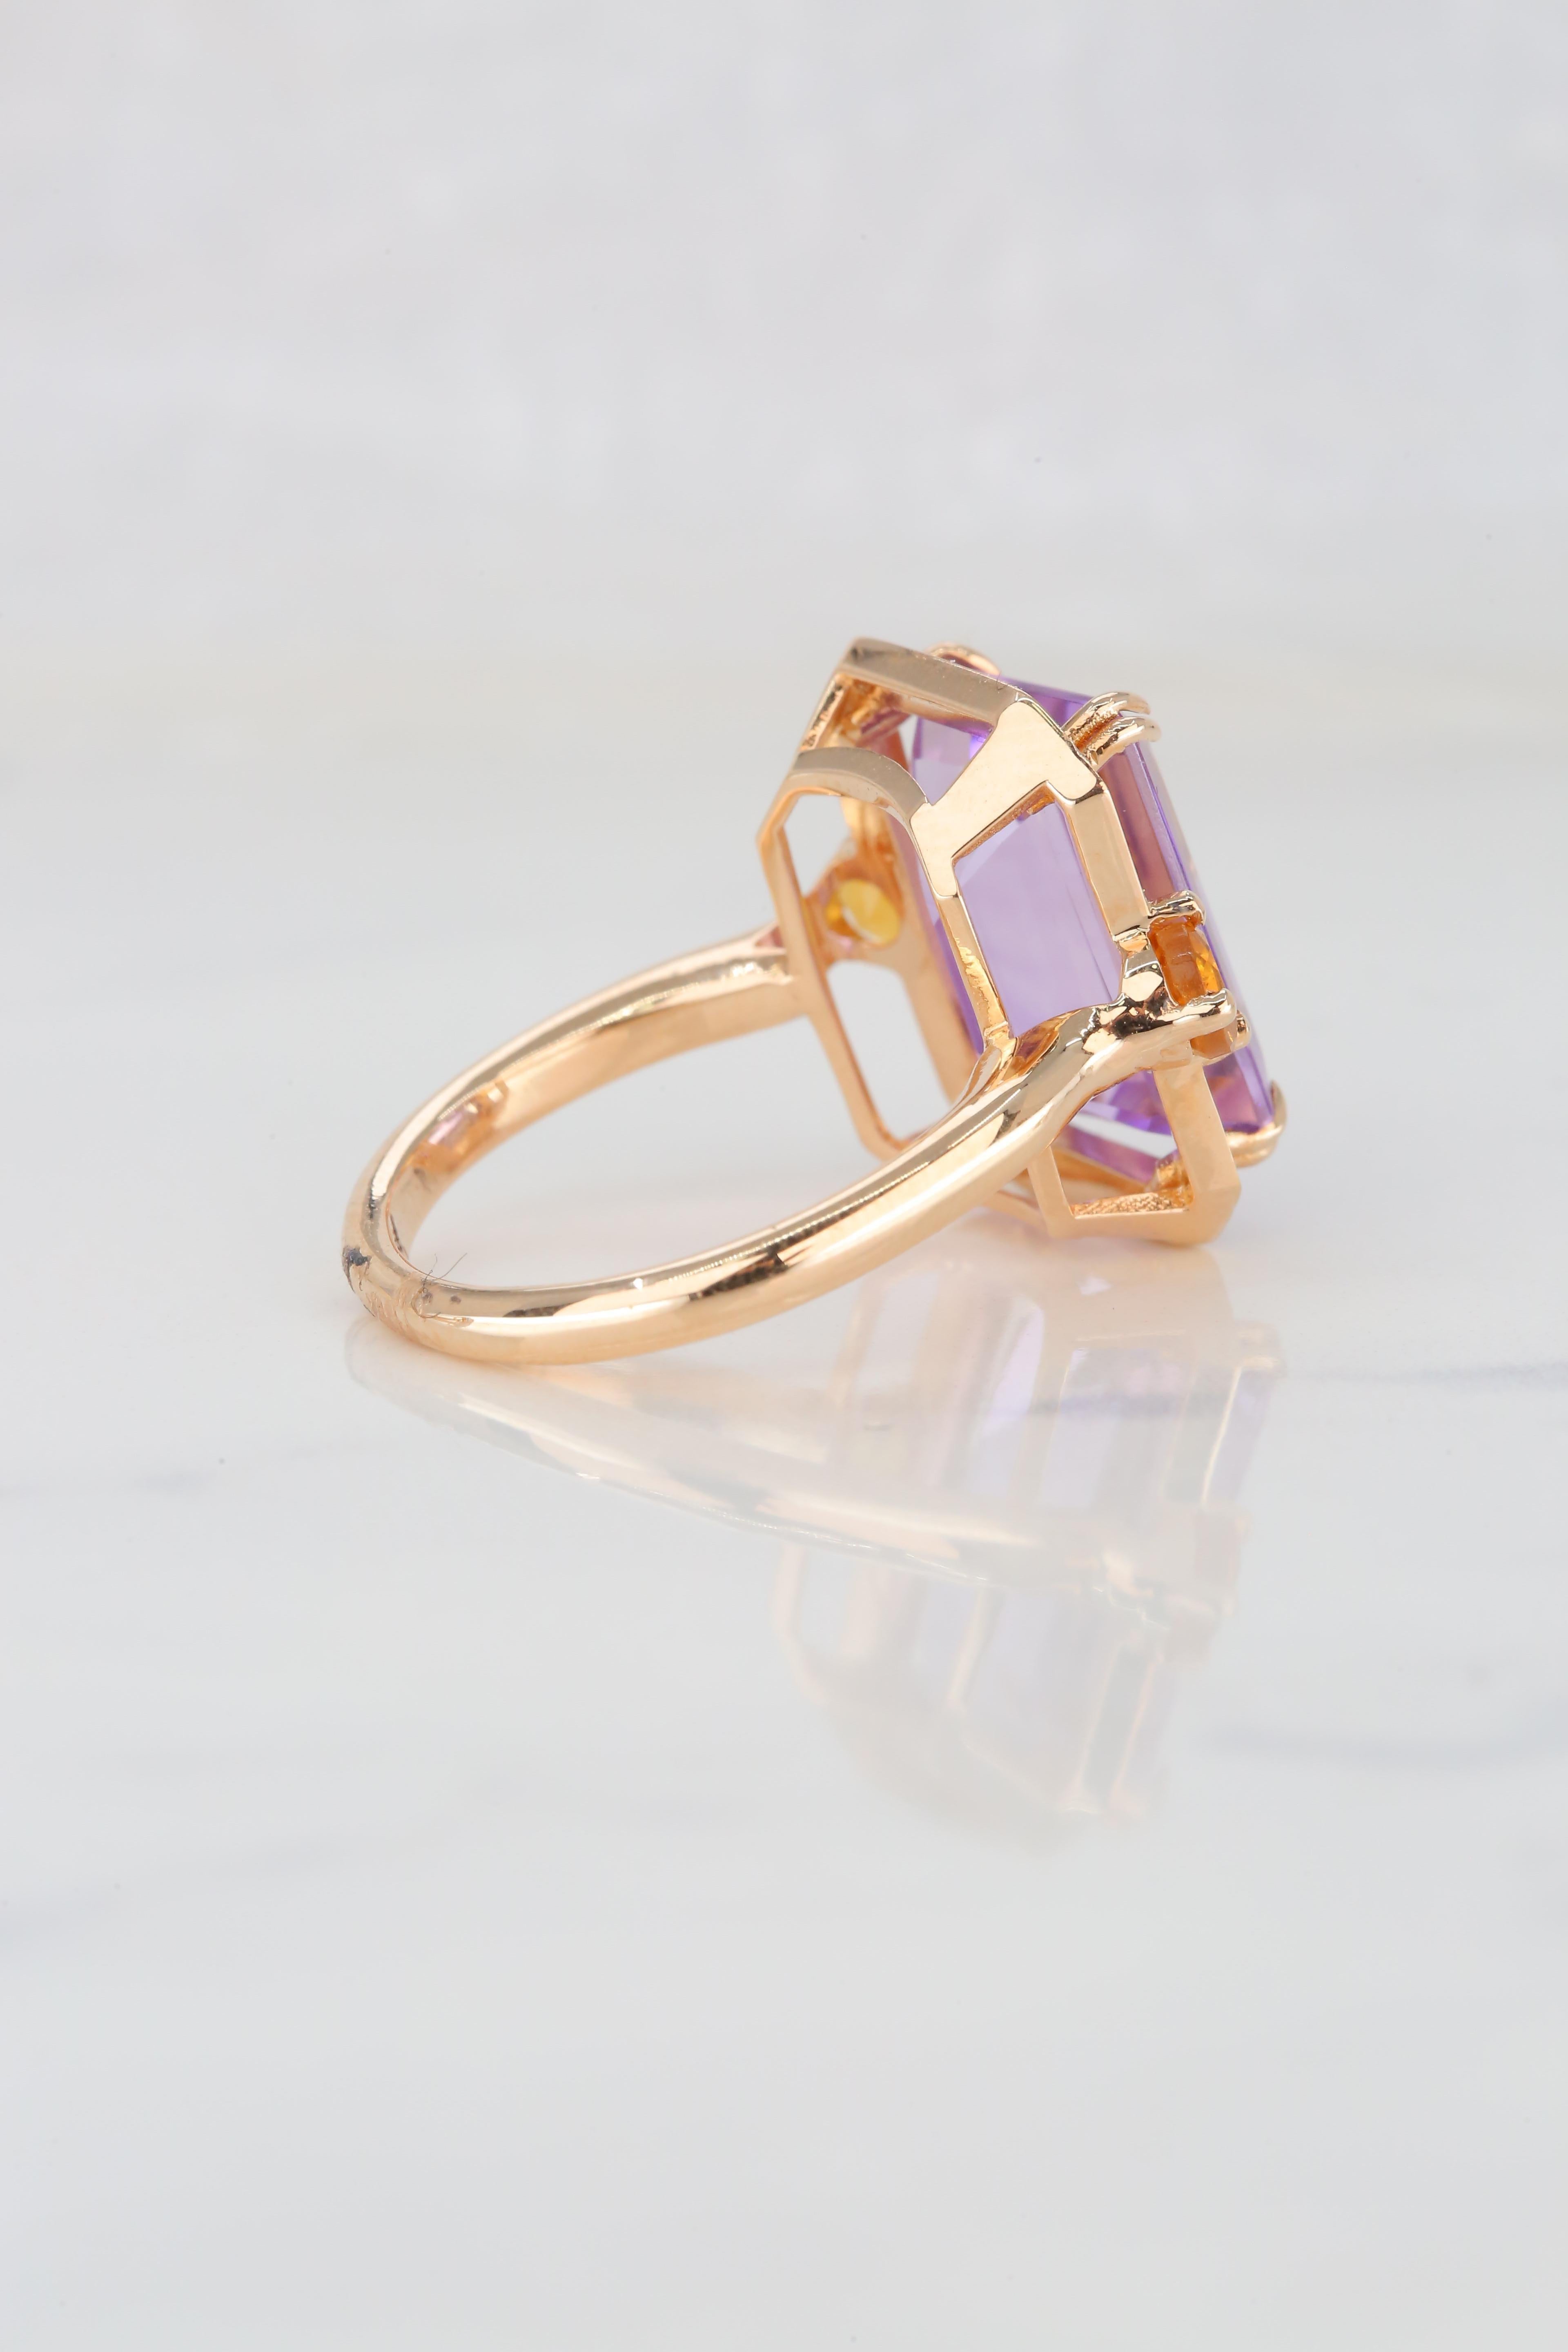 For Sale:  Art Deco Style Grey , Enameled Amethyst and Citrine 14K Gold Cocktail Ring 6